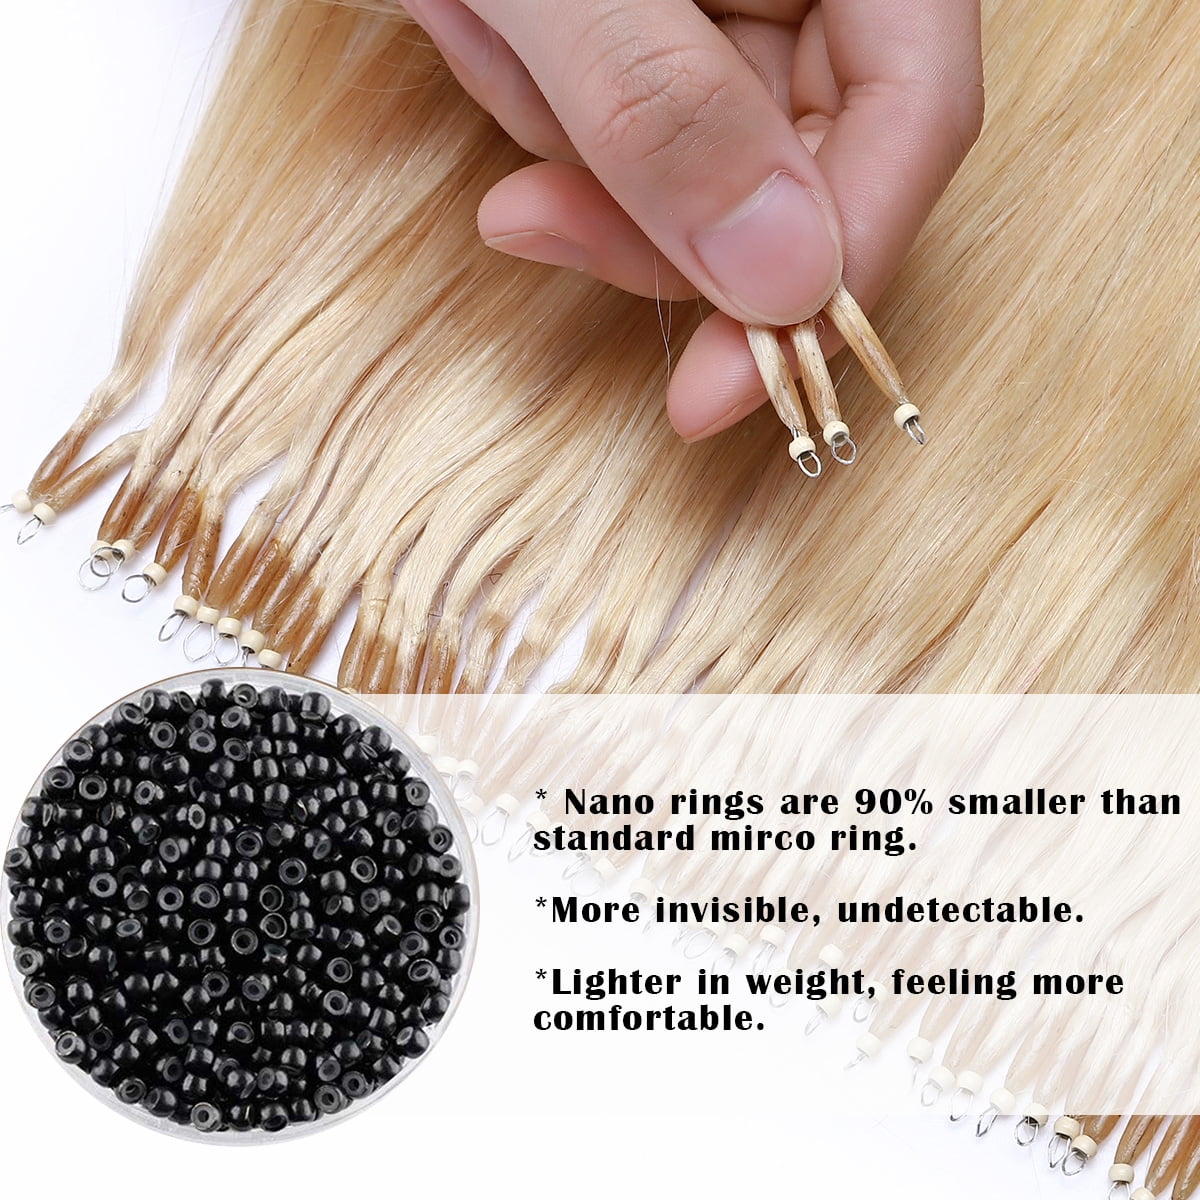 Remy Nano Ring Hair Extension Beads Black/Brown/Blonde Colors, 70g/80g/14s  Micro Loop Design From Angel18369127194, $35.45